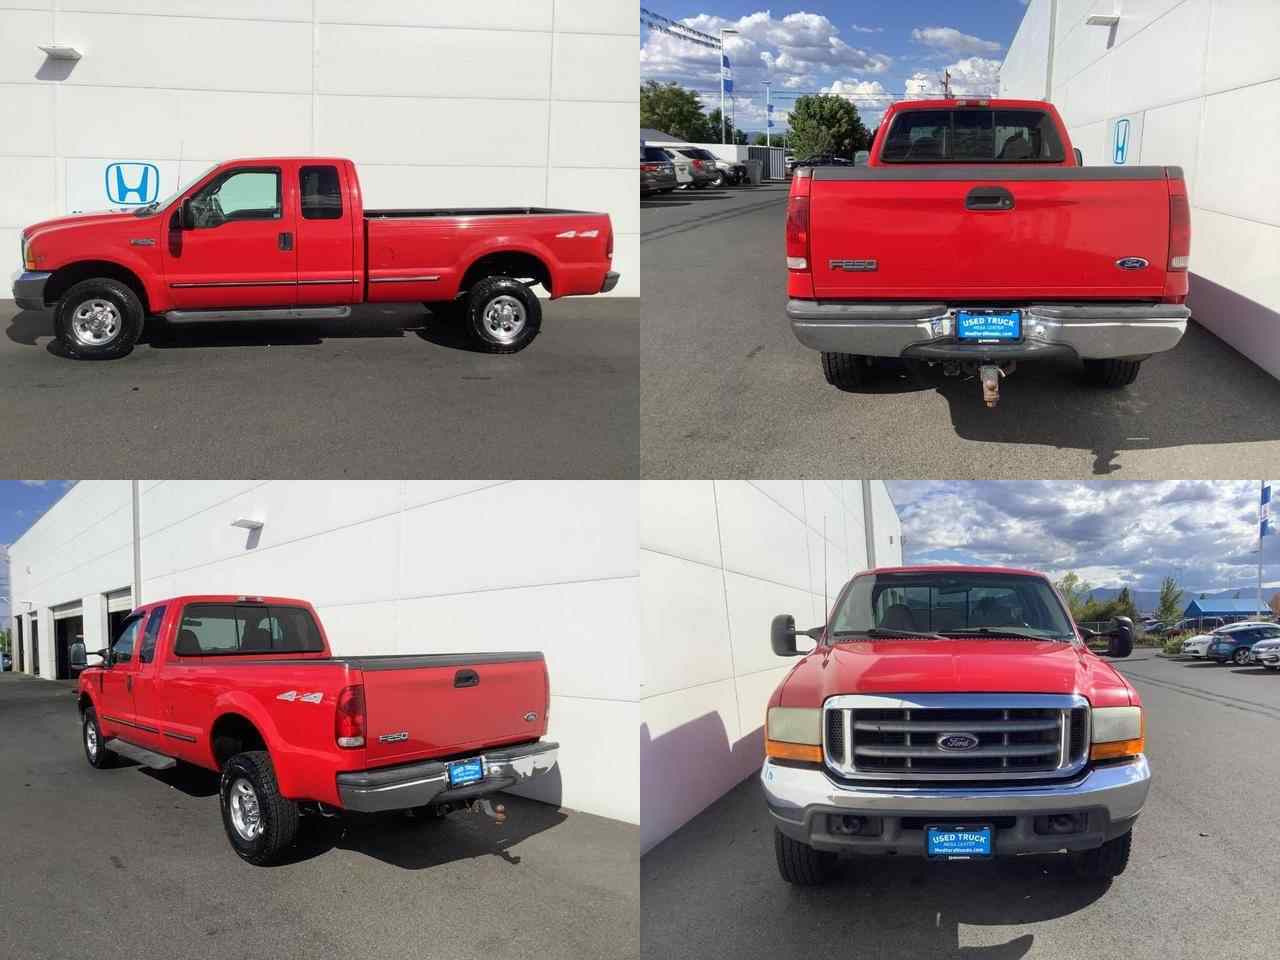 1999 Ford F-250 Lariat used for sale near me